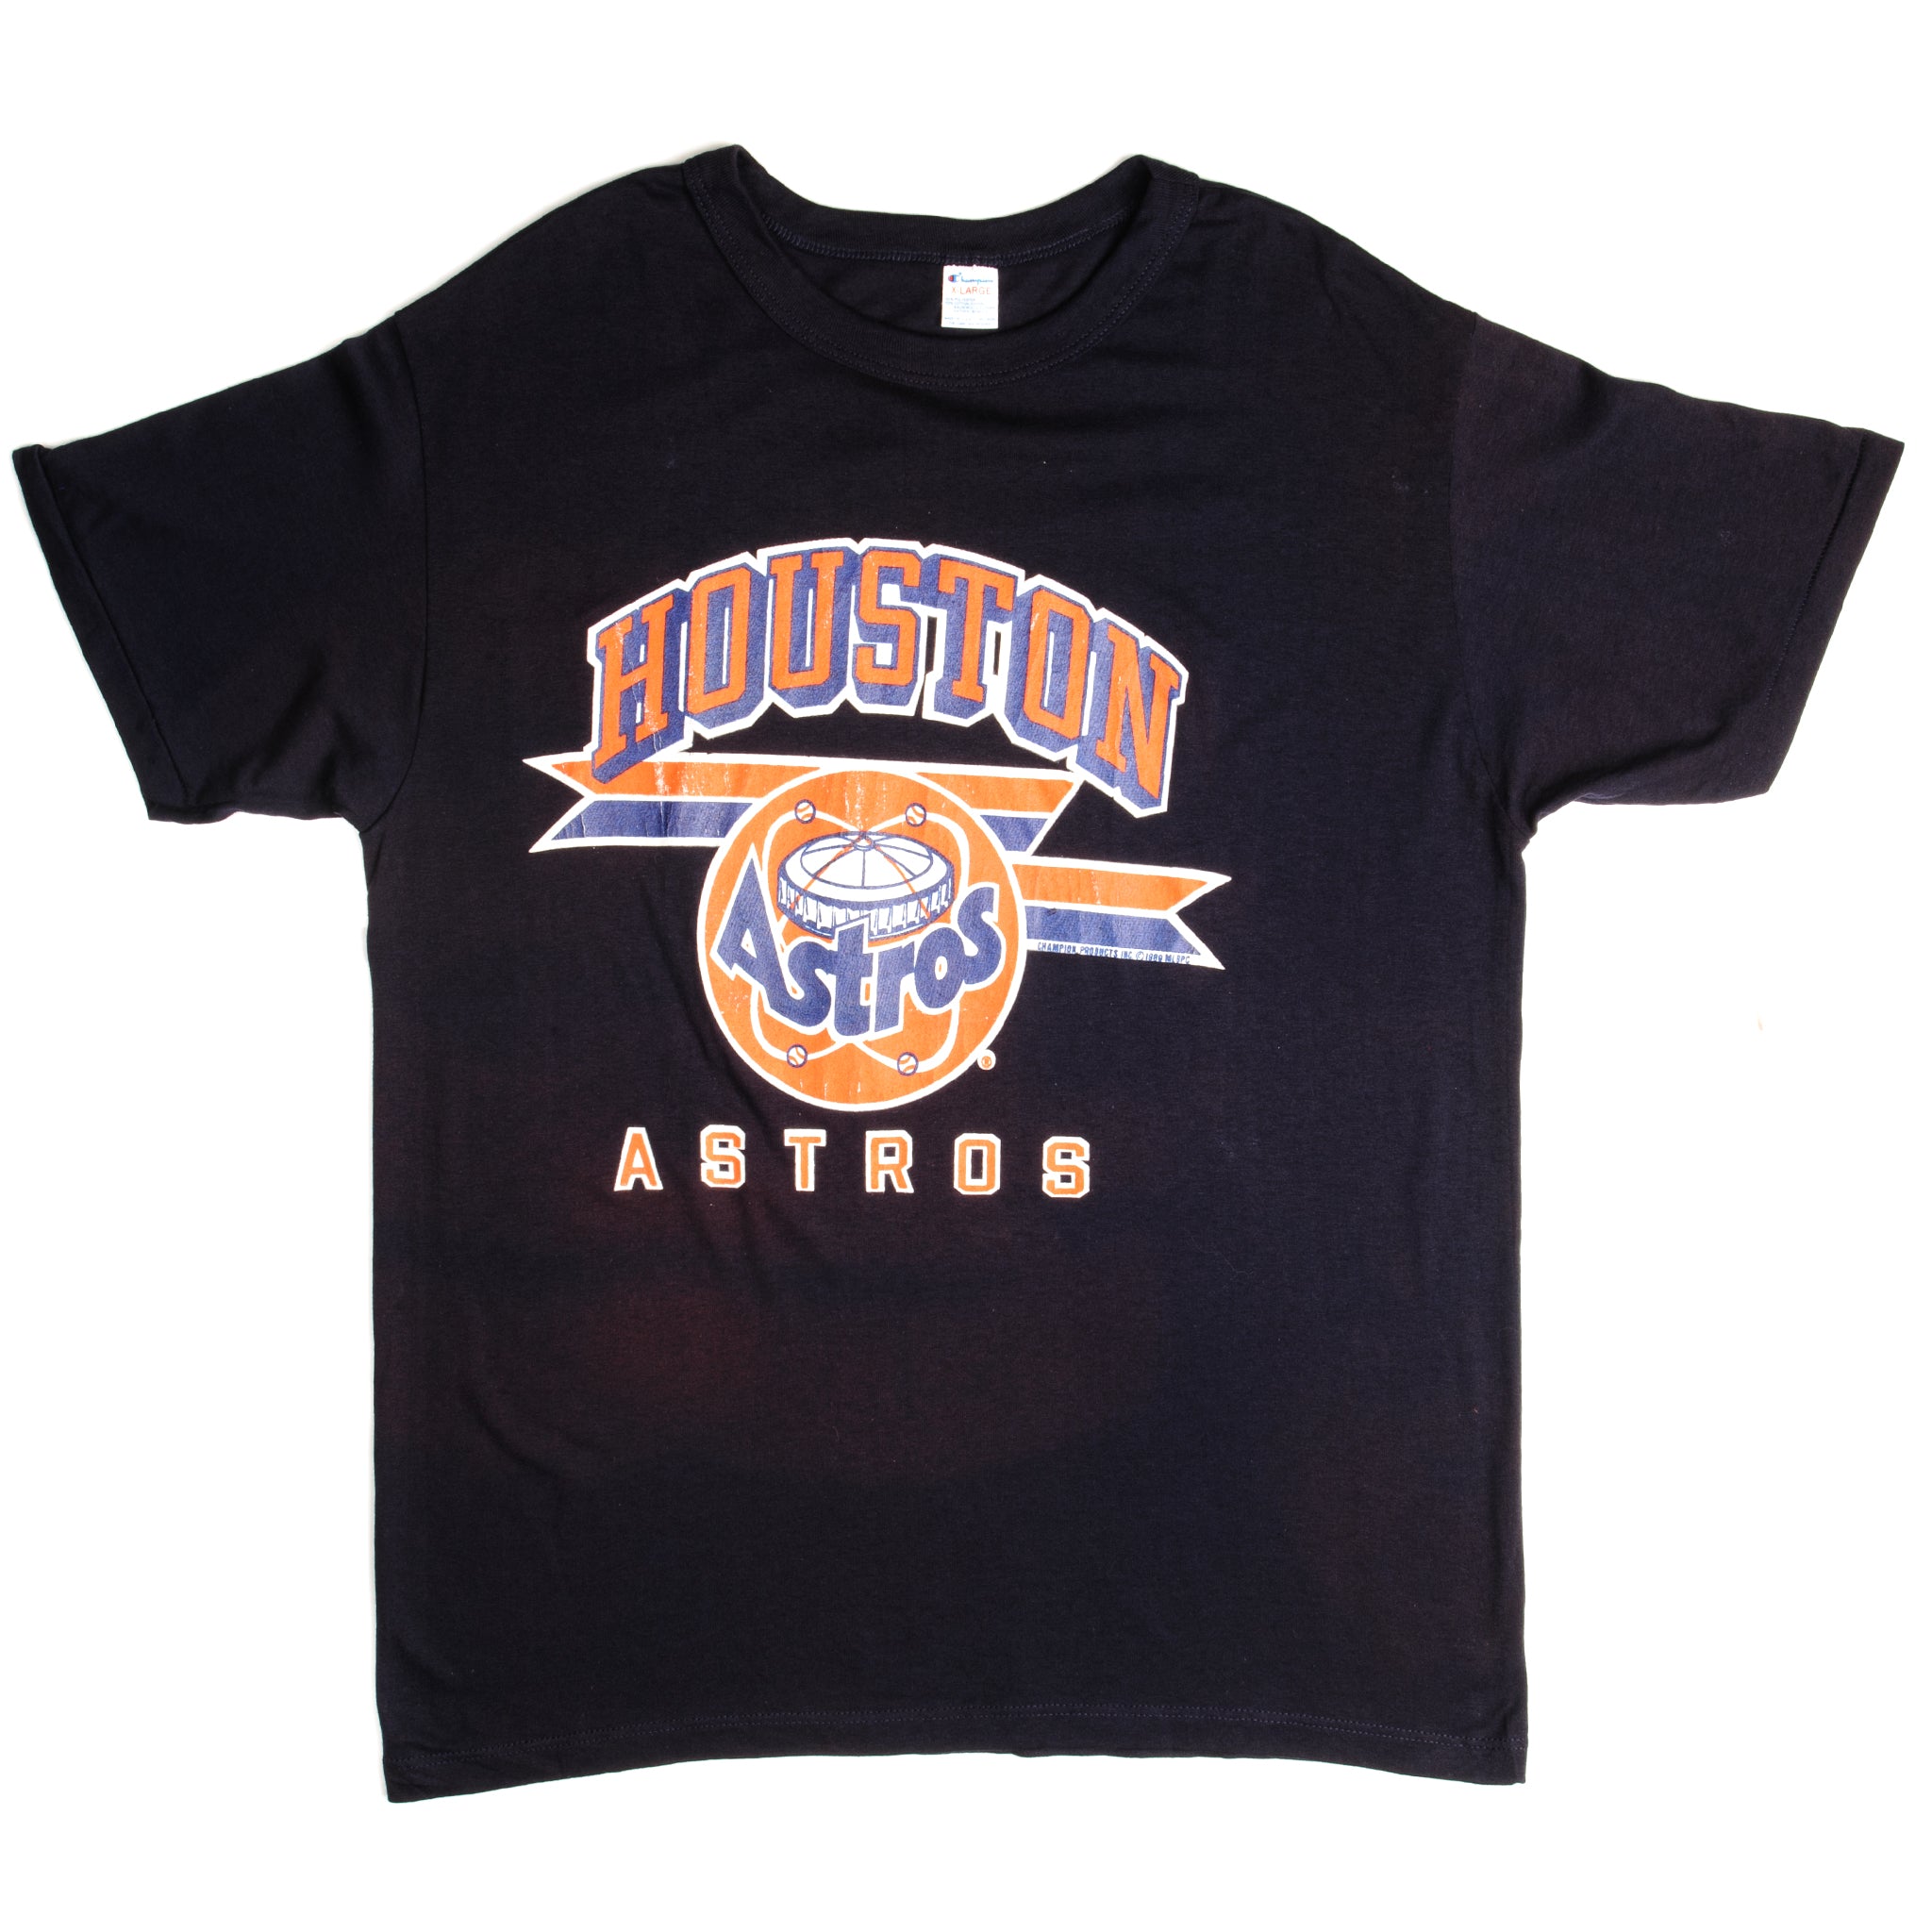 Vintage Champion MLB Houston Astros Tee Shirt 1989 Size XL Made in USA Deadstock